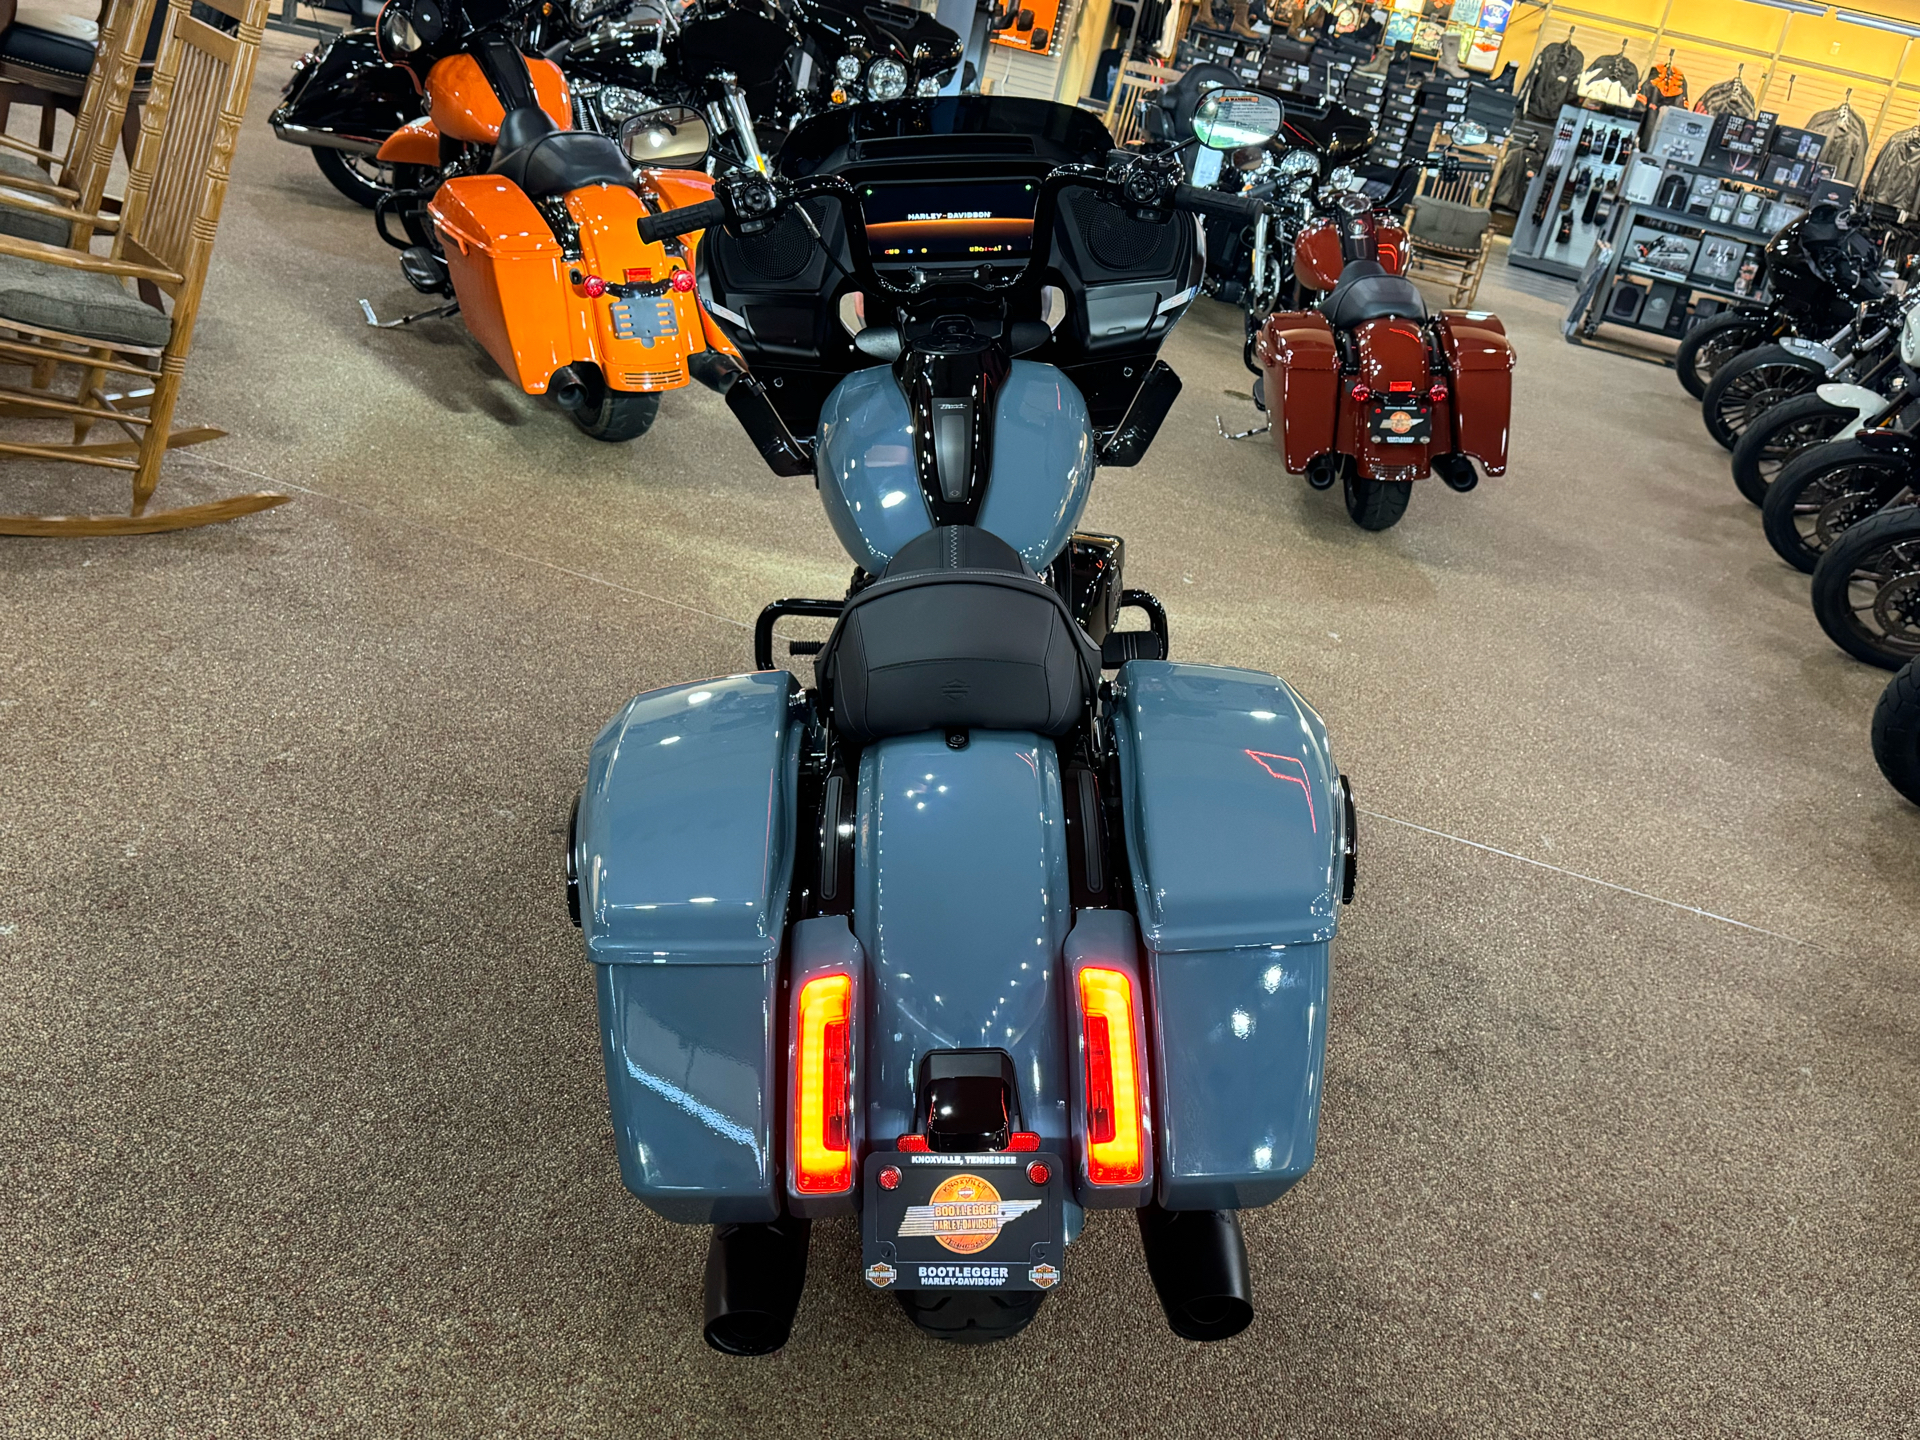 2024 Harley-Davidson Road Glide® in Knoxville, Tennessee - Photo 16